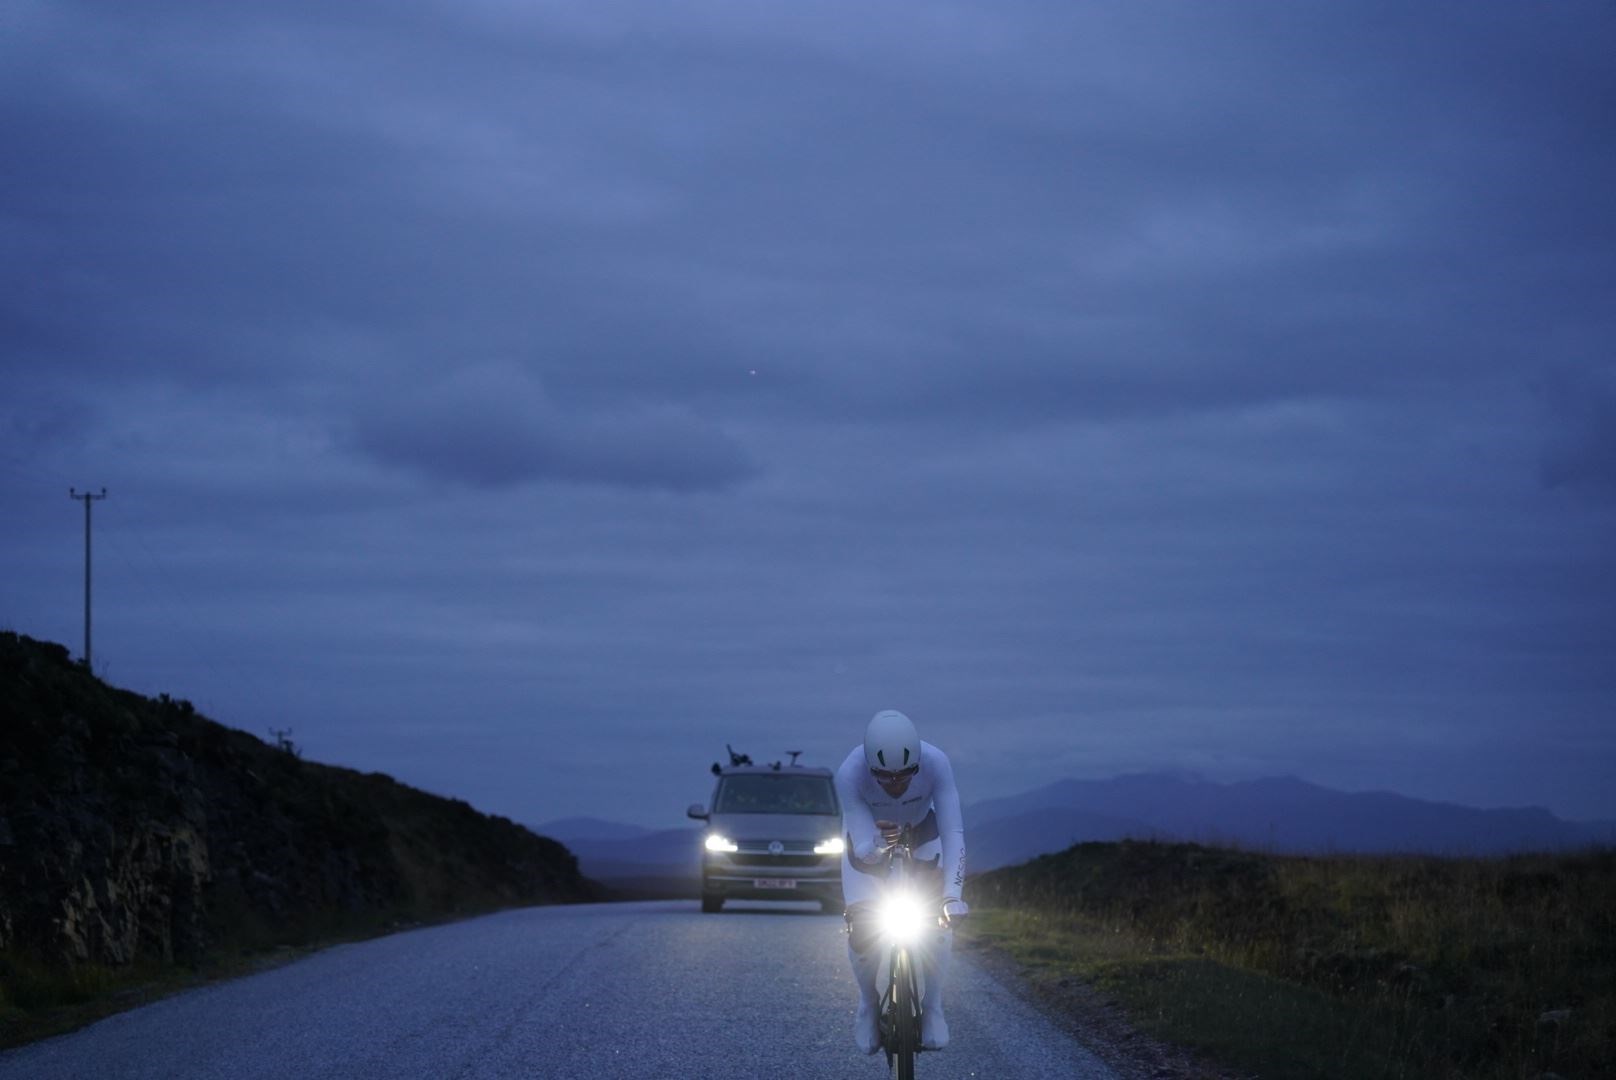 Mark Beaumont is being accompanied by a film crew who are making a documentary for GC+. Picture: Markus Stitz